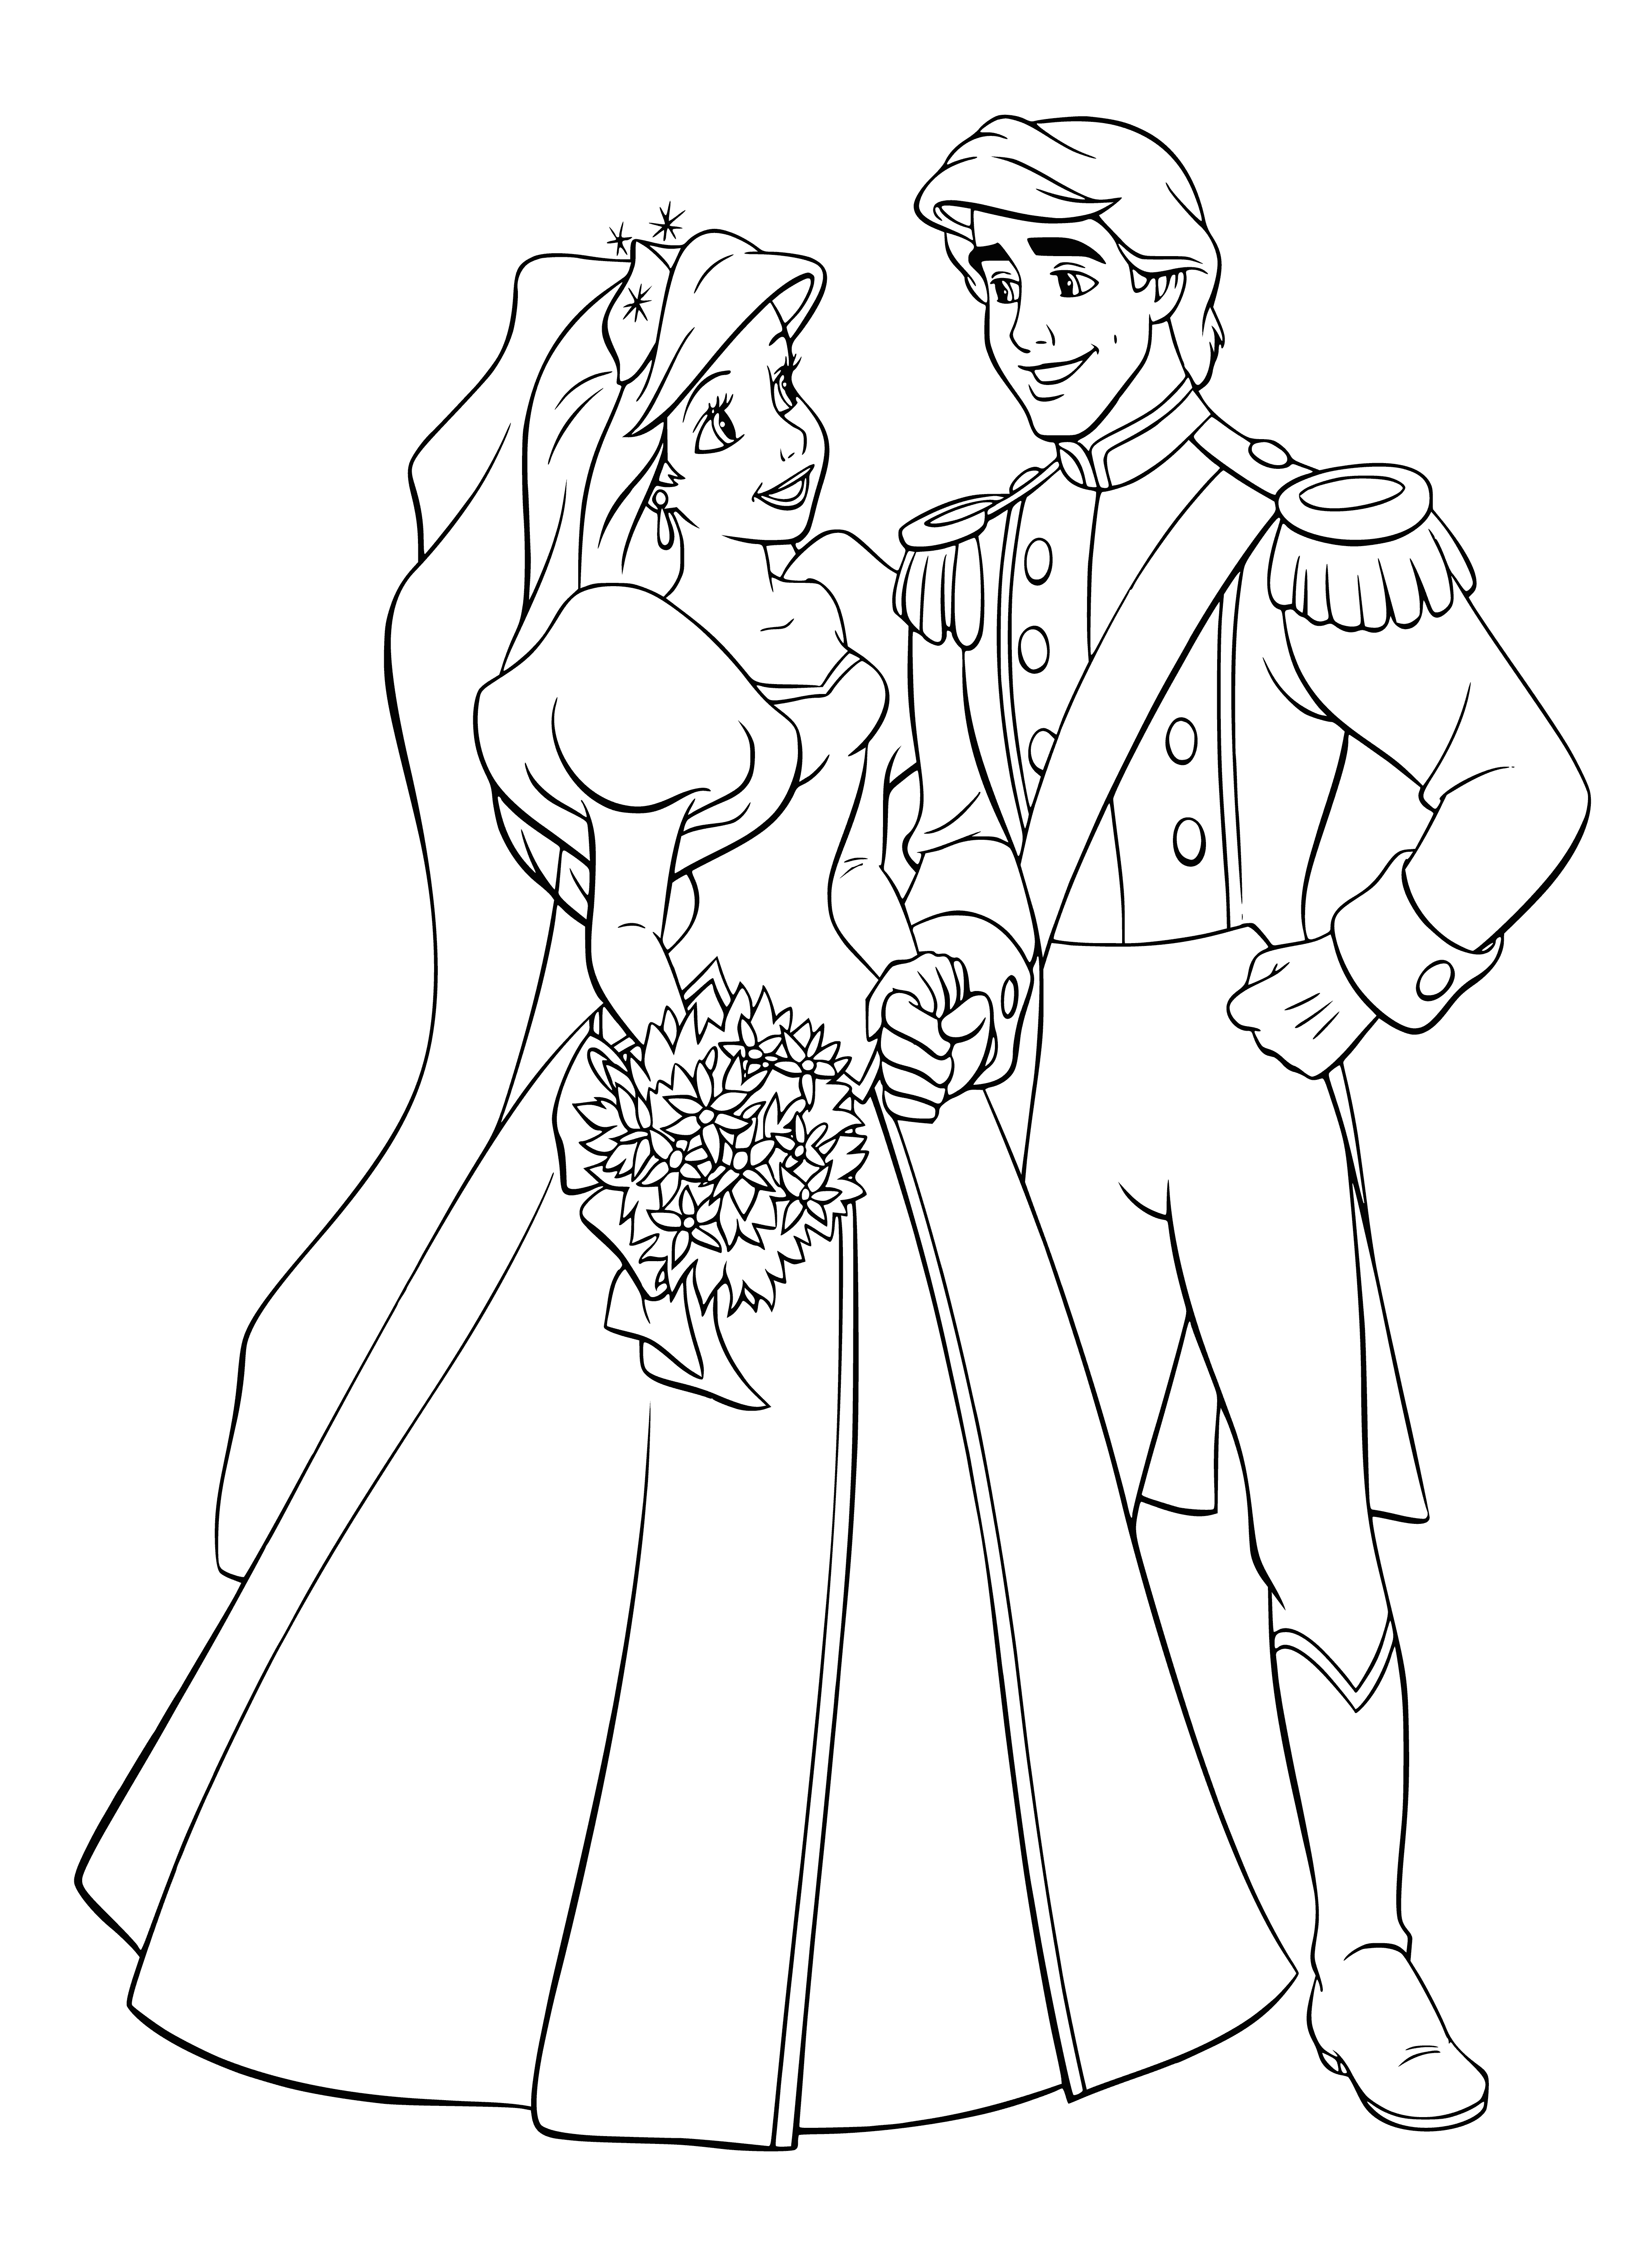 Ariel and Prince Eric's wedding coloring page